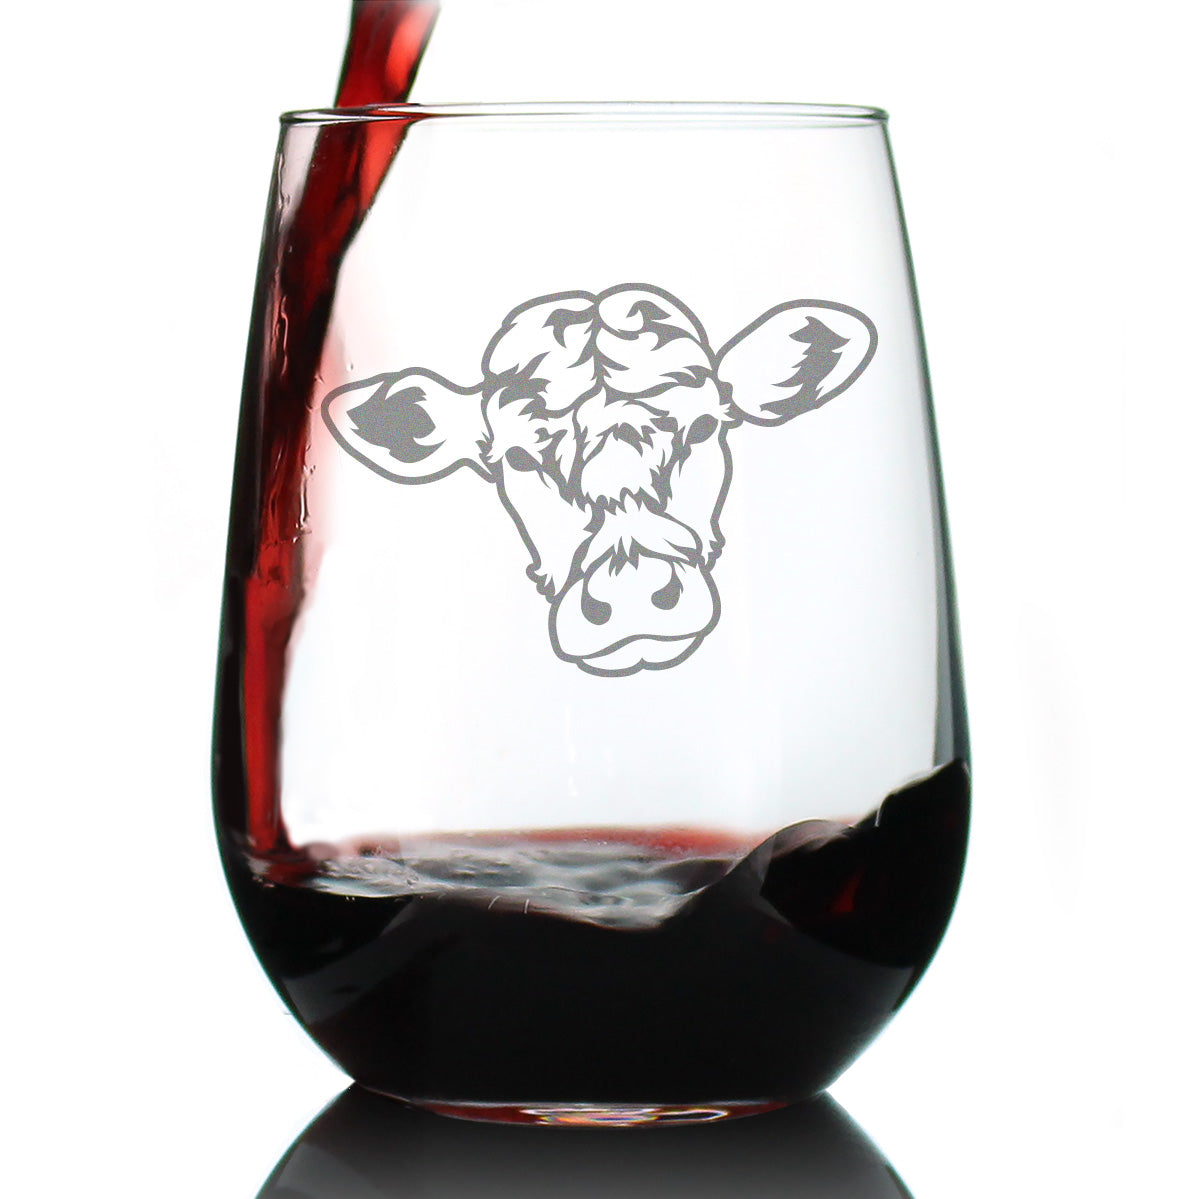 Cow Face Stemless Wine Glass - Funny Cute Farm Animal Themed Decor and Gifts for Cow Lovers - Large 17 Oz